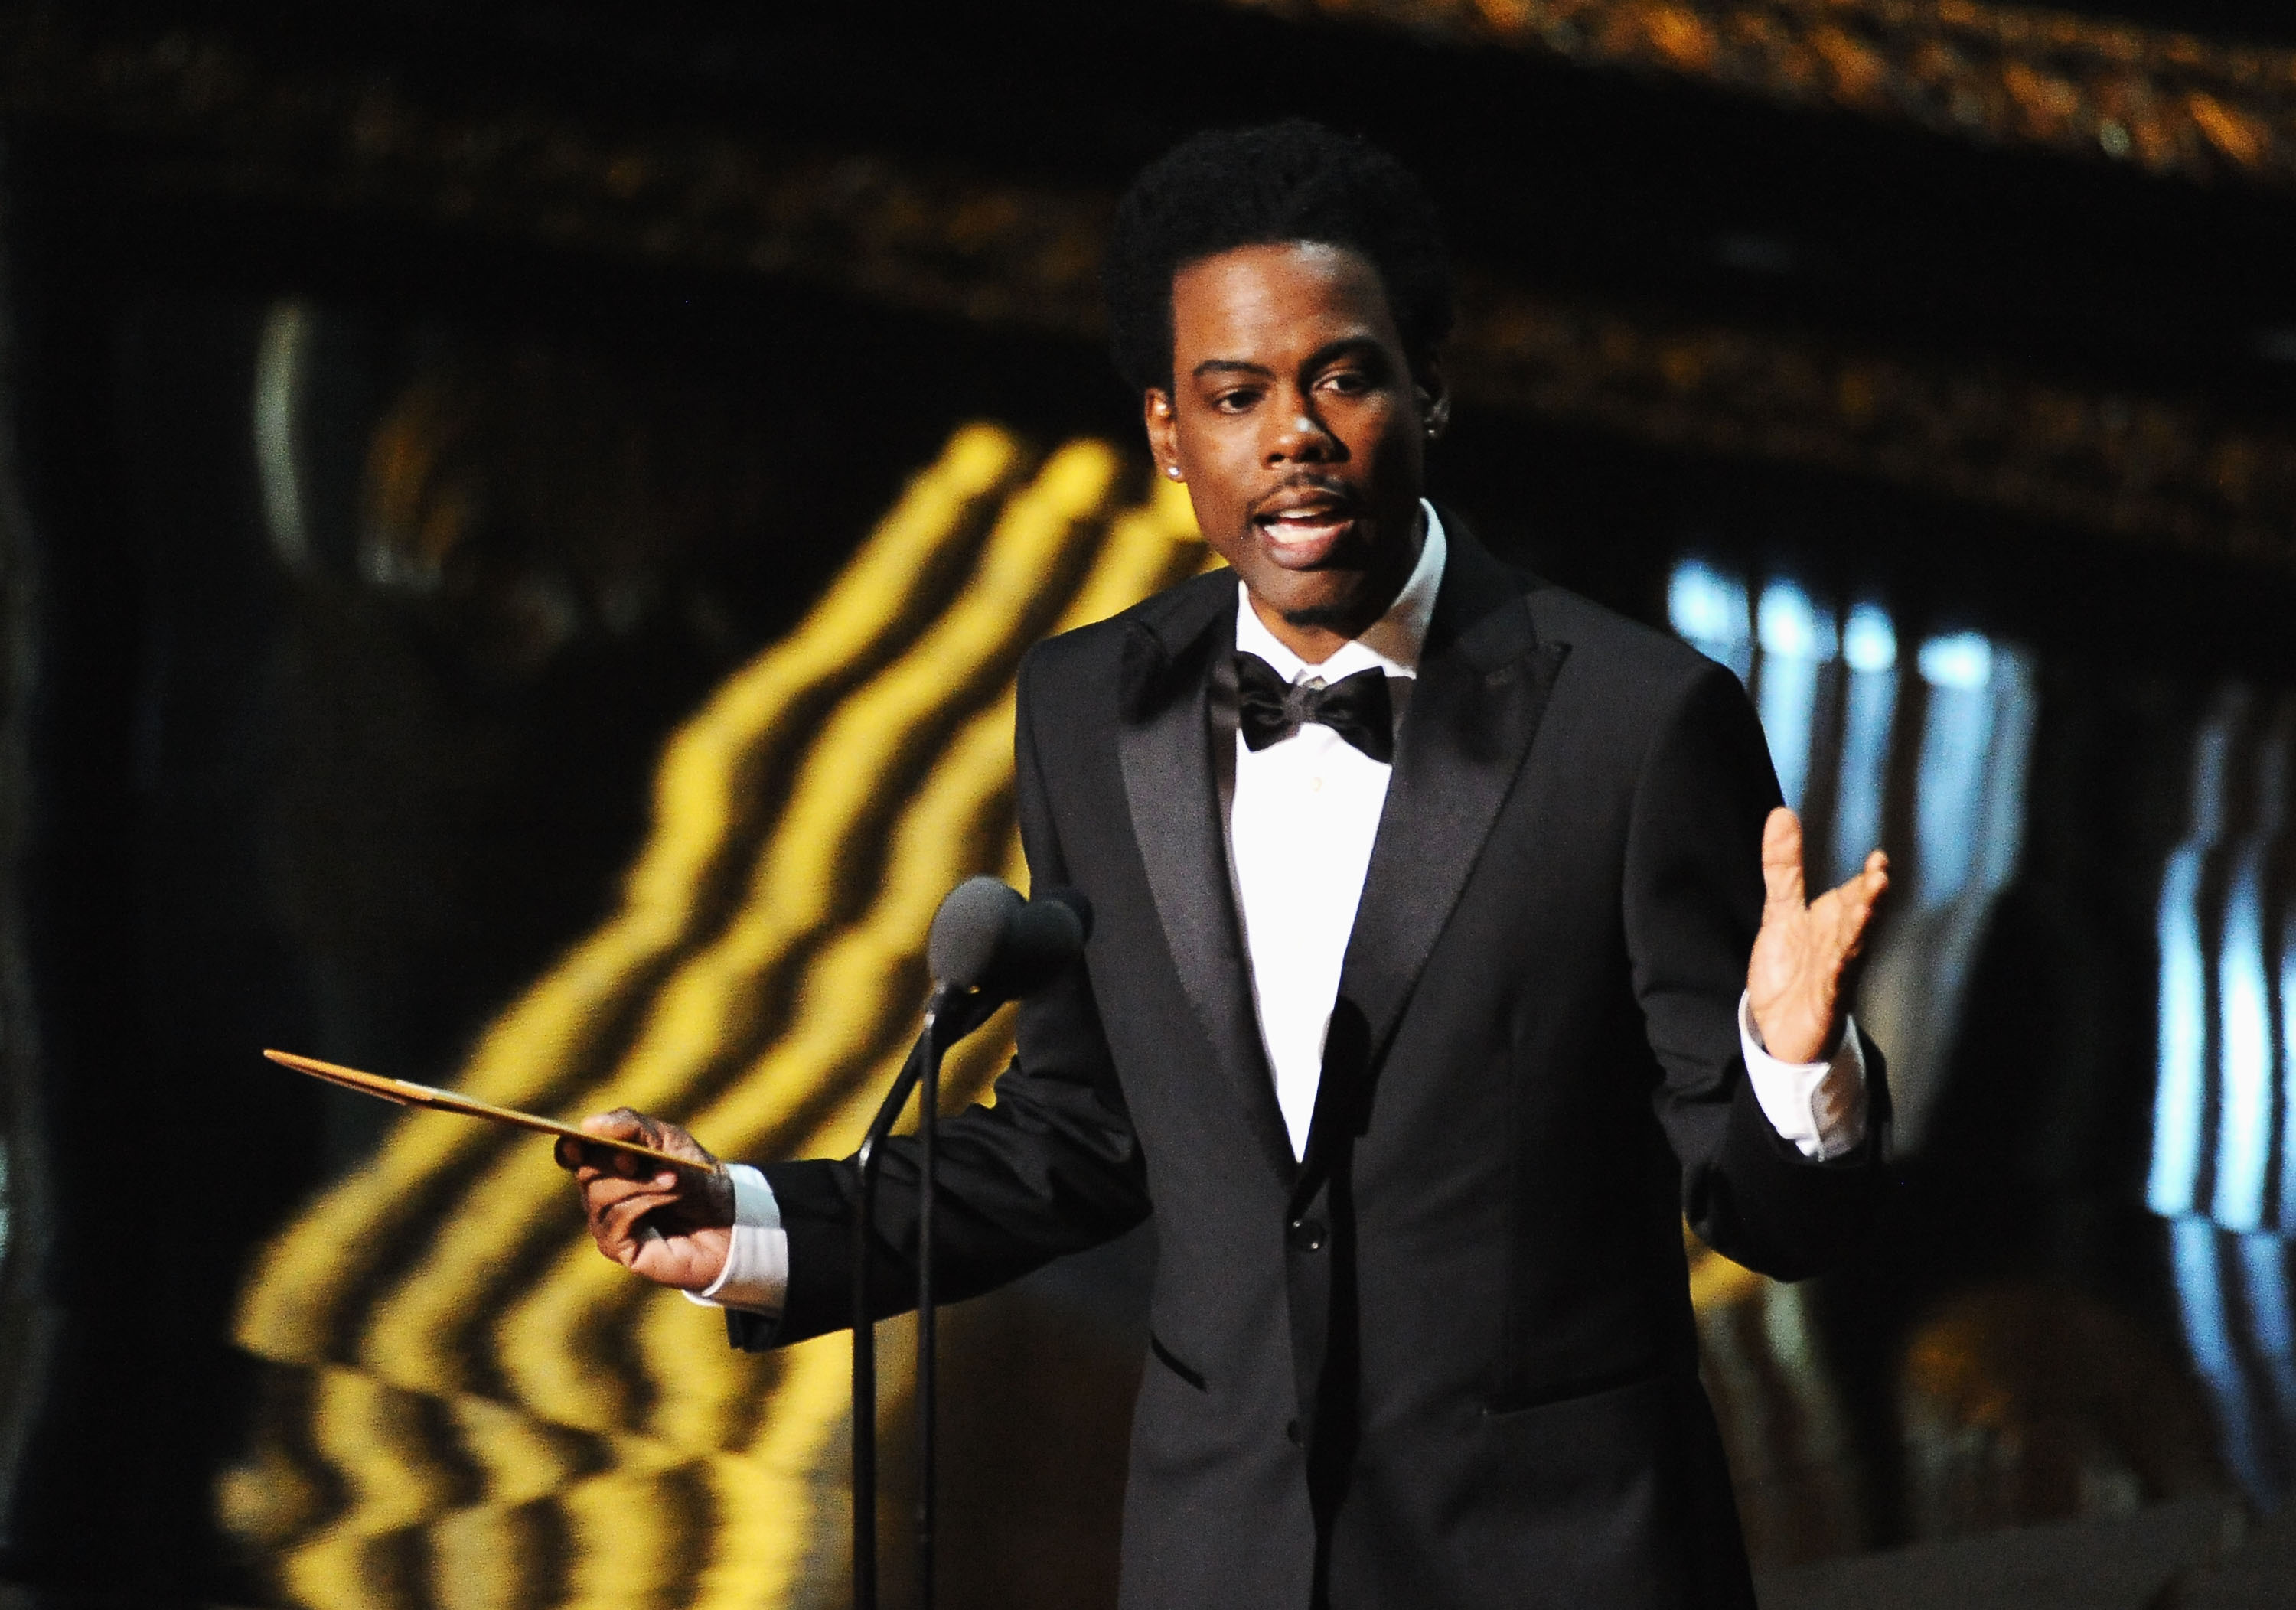 Chris Rock presenting at the Academy Awards in 2012. (Mark Davis—WireImage)